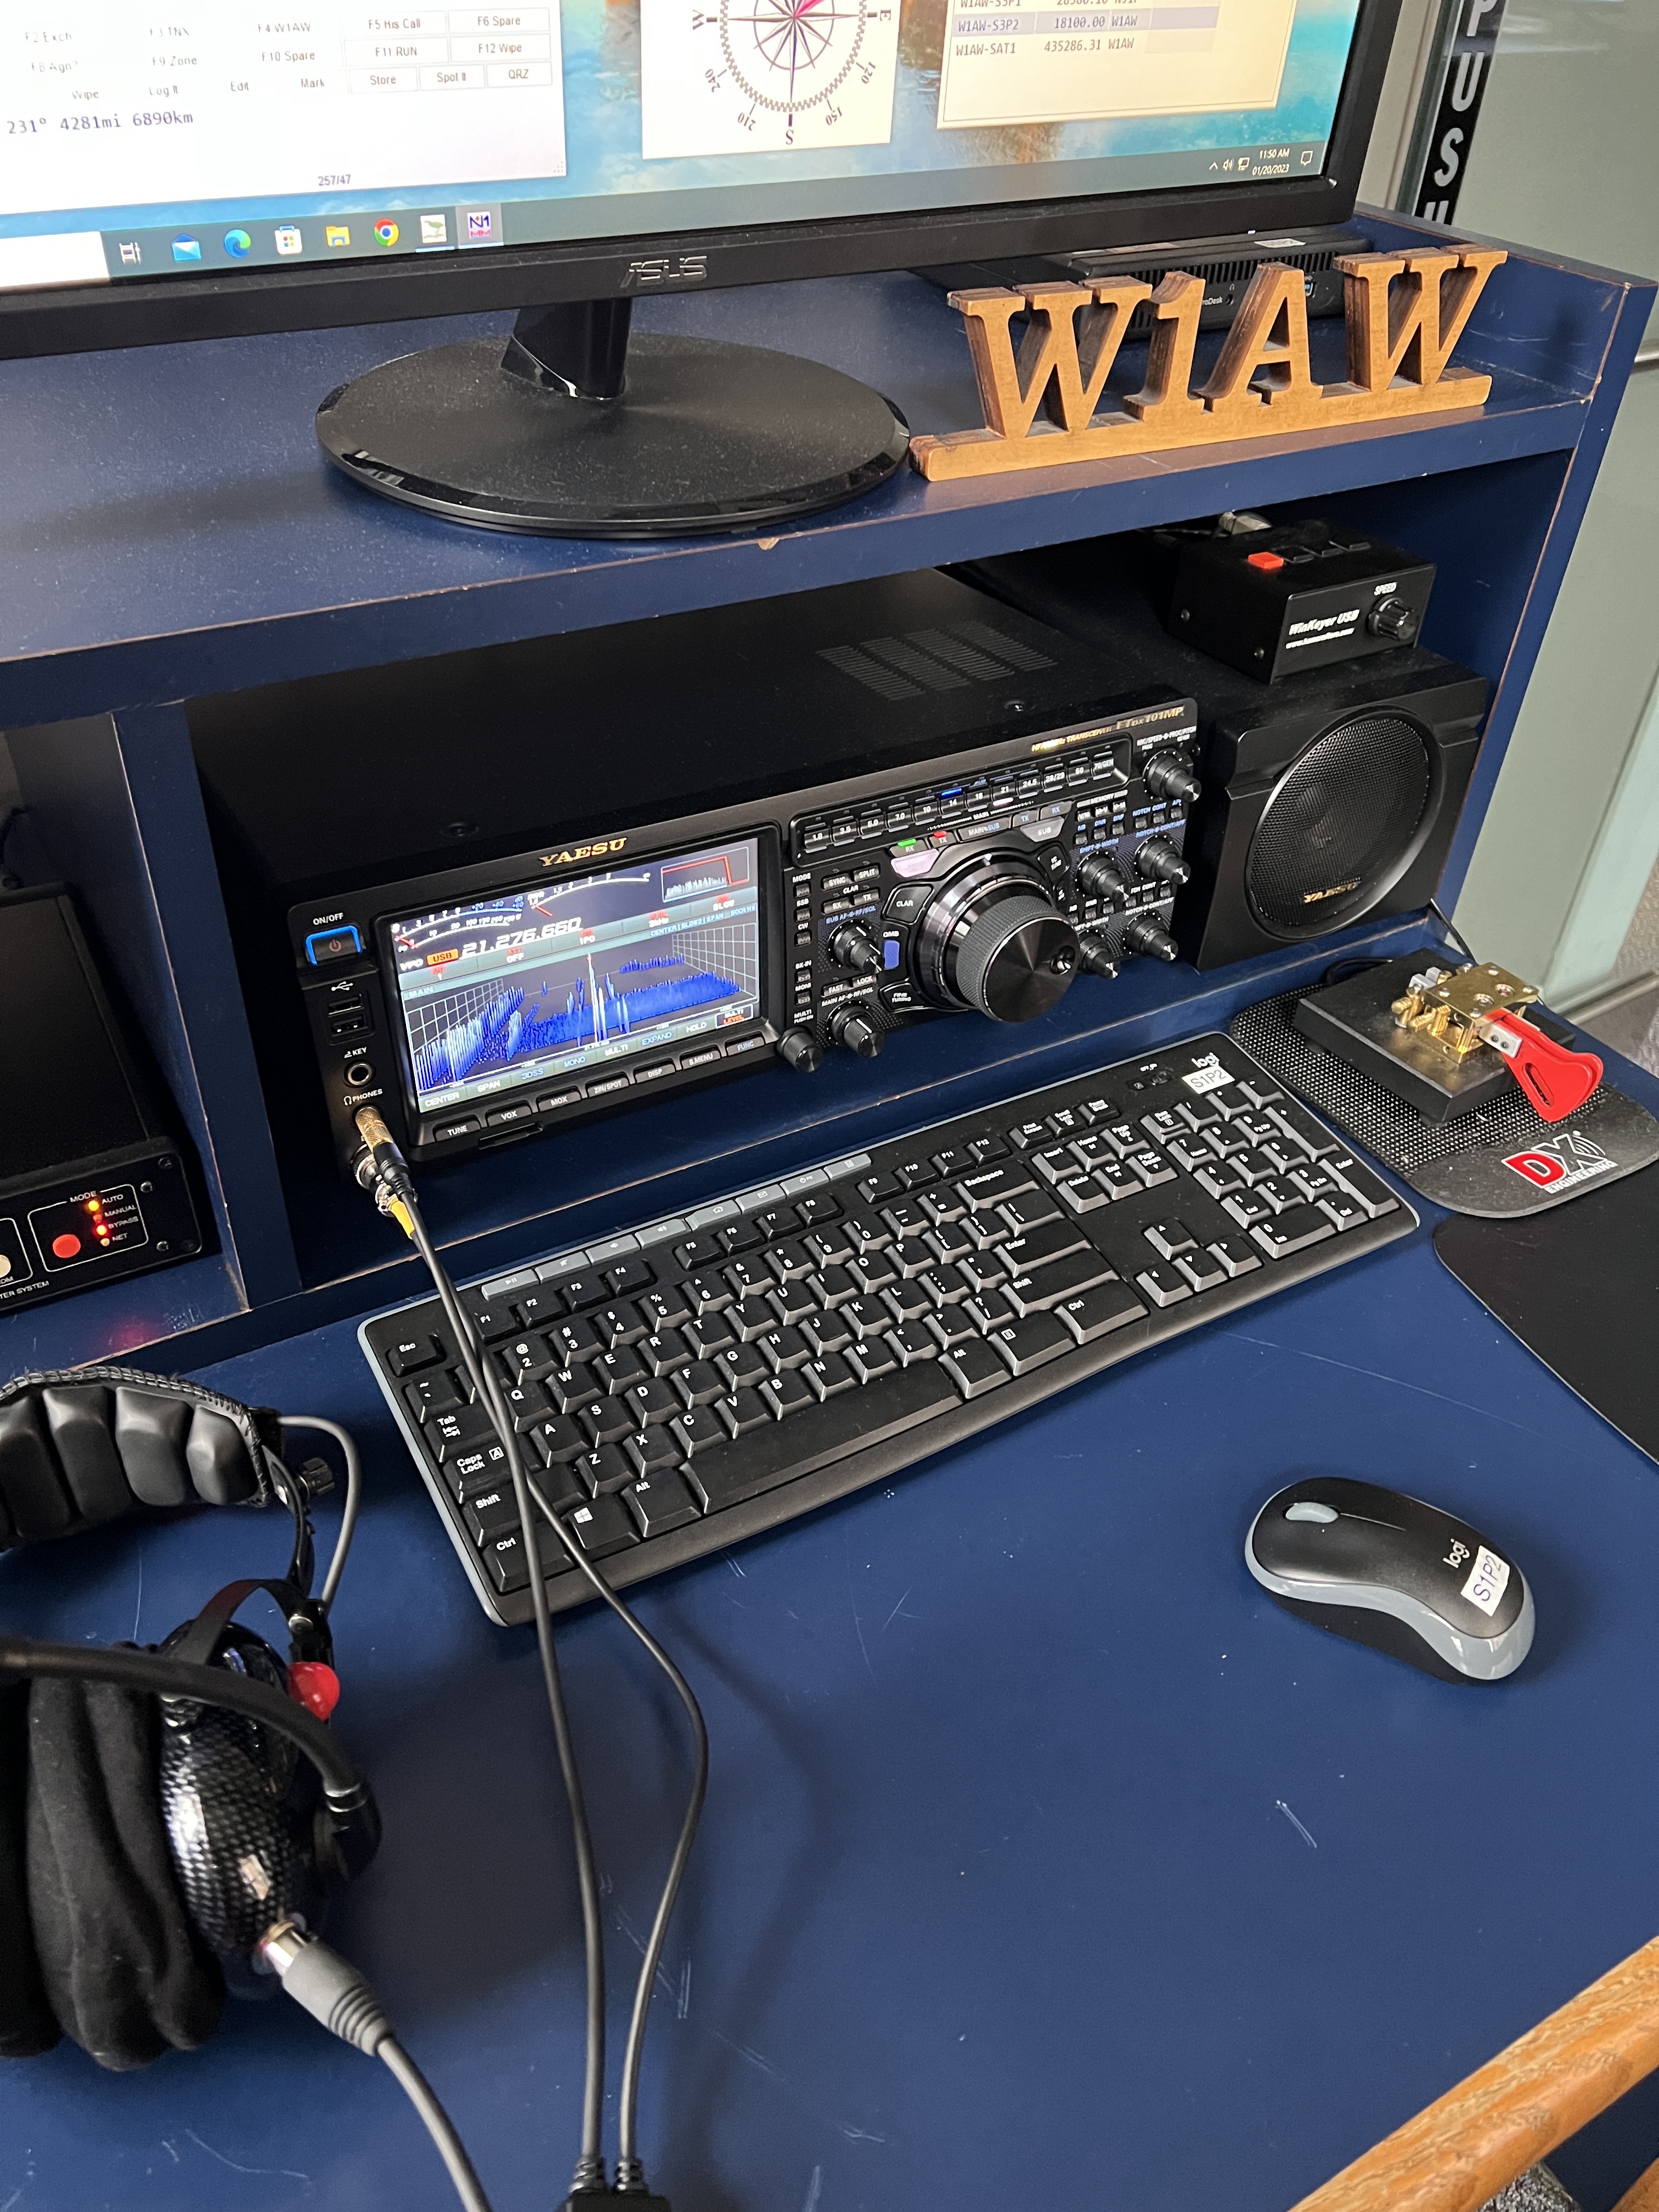 Yaesu Radios Donated to ARRL to Inspire Visitors and Young Hams